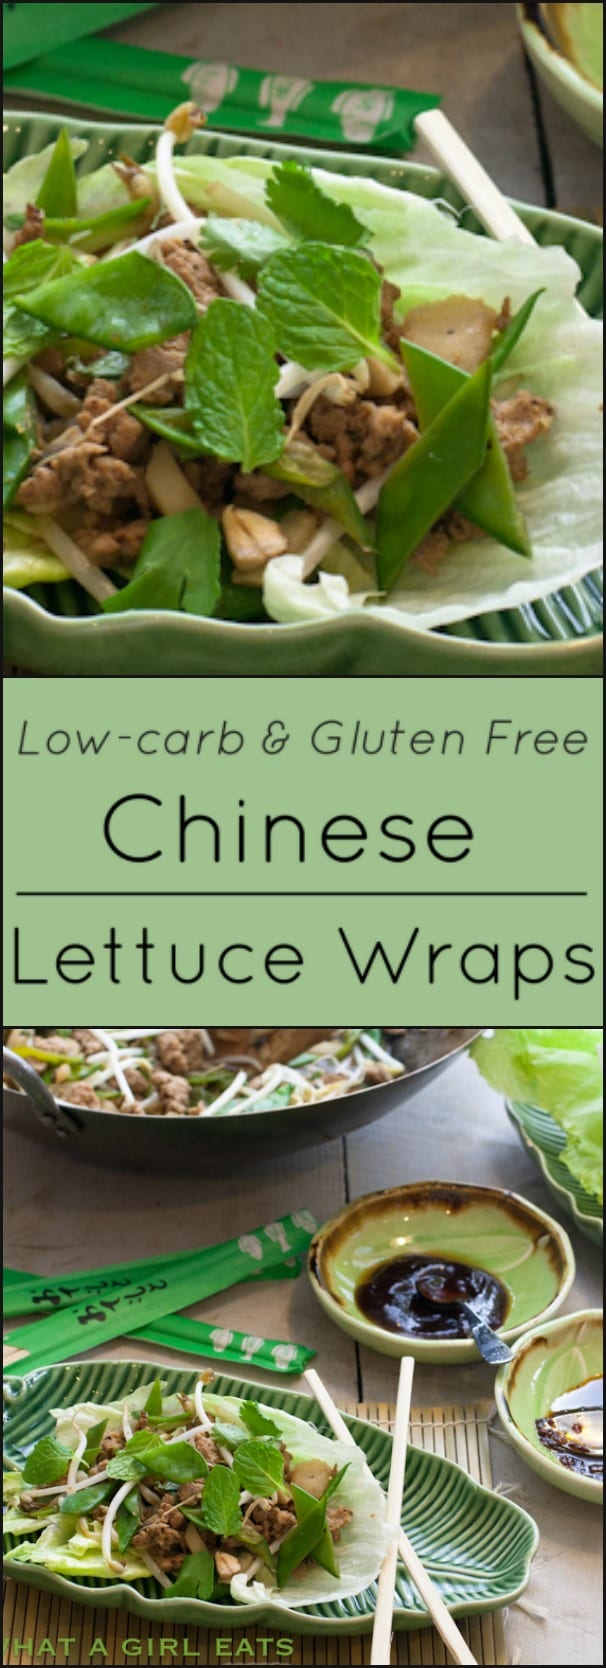 Low-carb, gluten free Chinese Lettuce Cups.